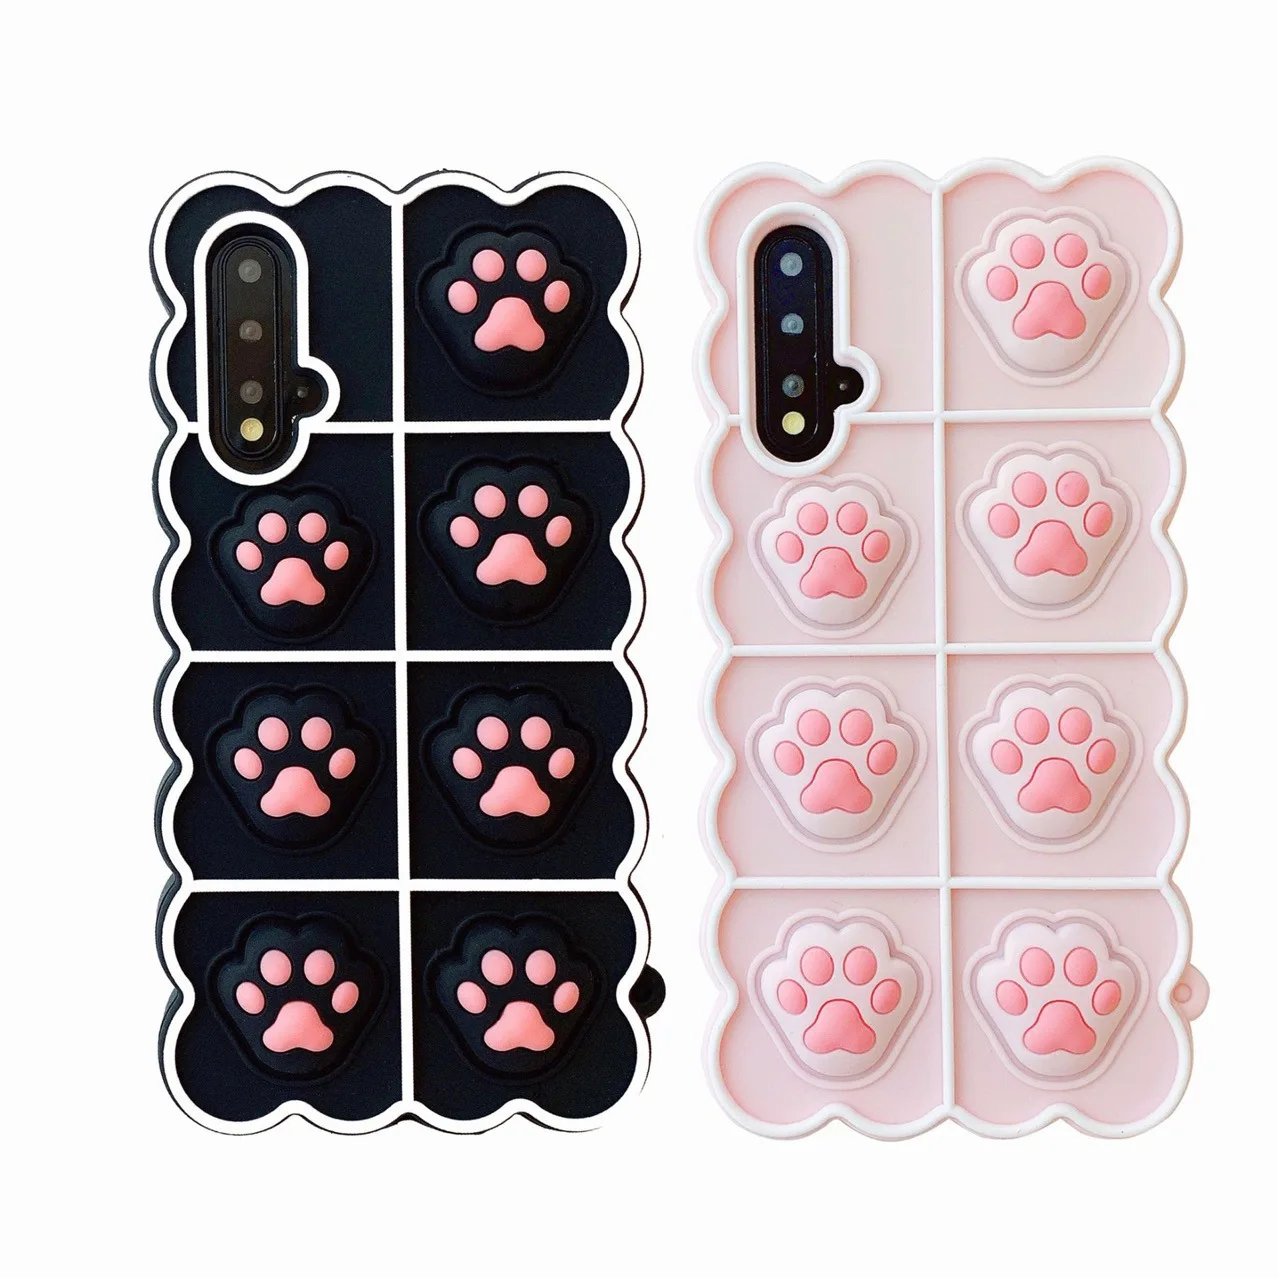 

New Decompression Cat Claw Cartoon Mobile Phone Case Suitable For Phone13 Silicone Protective Cover 678plus Soft Case, Picture shows